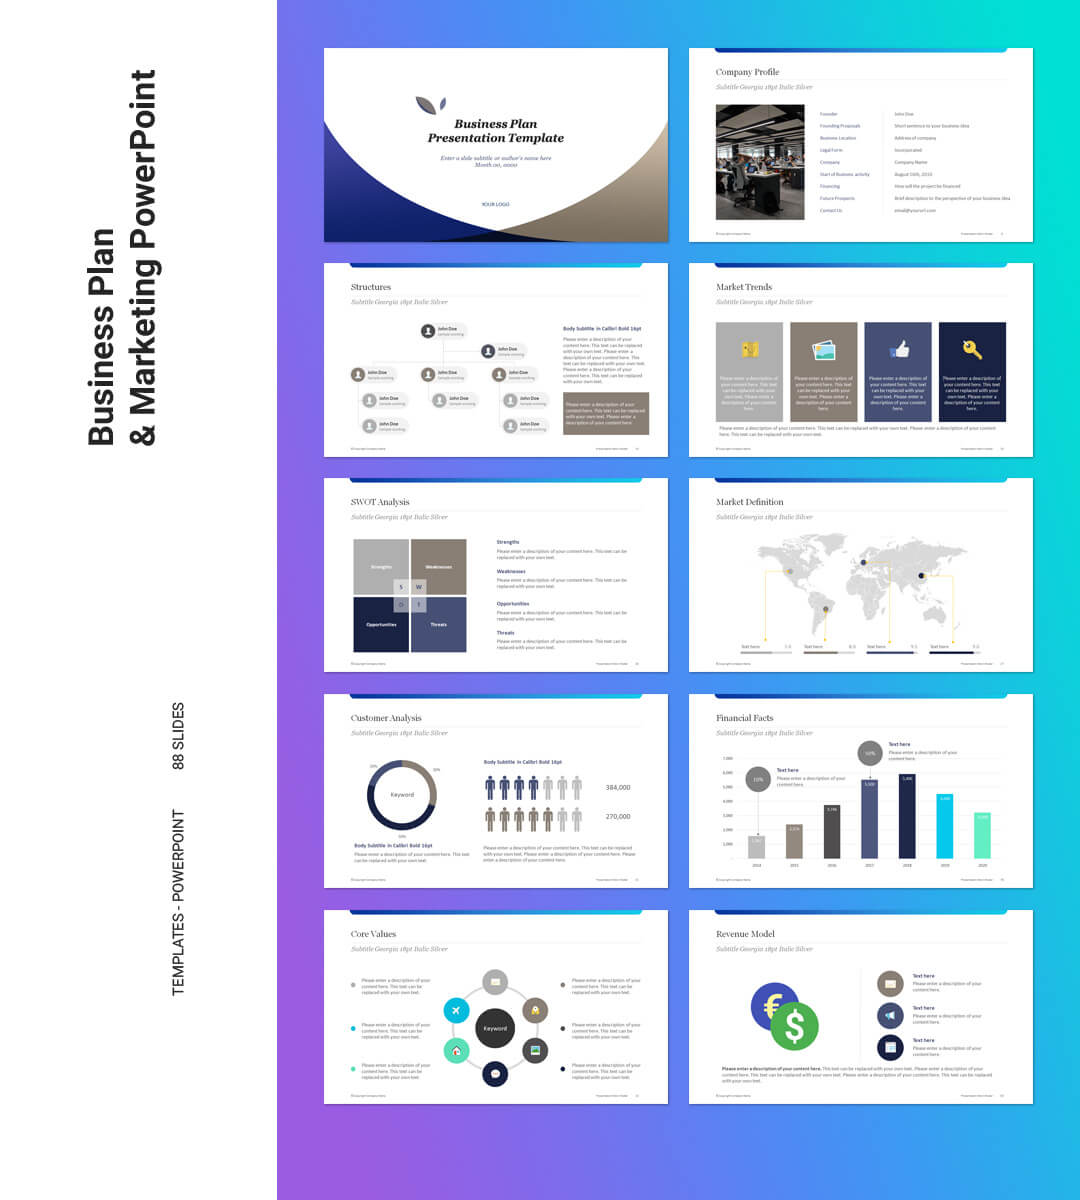 Business Plan Presentation Template Throughout Business Plan Presentation Template Ppt